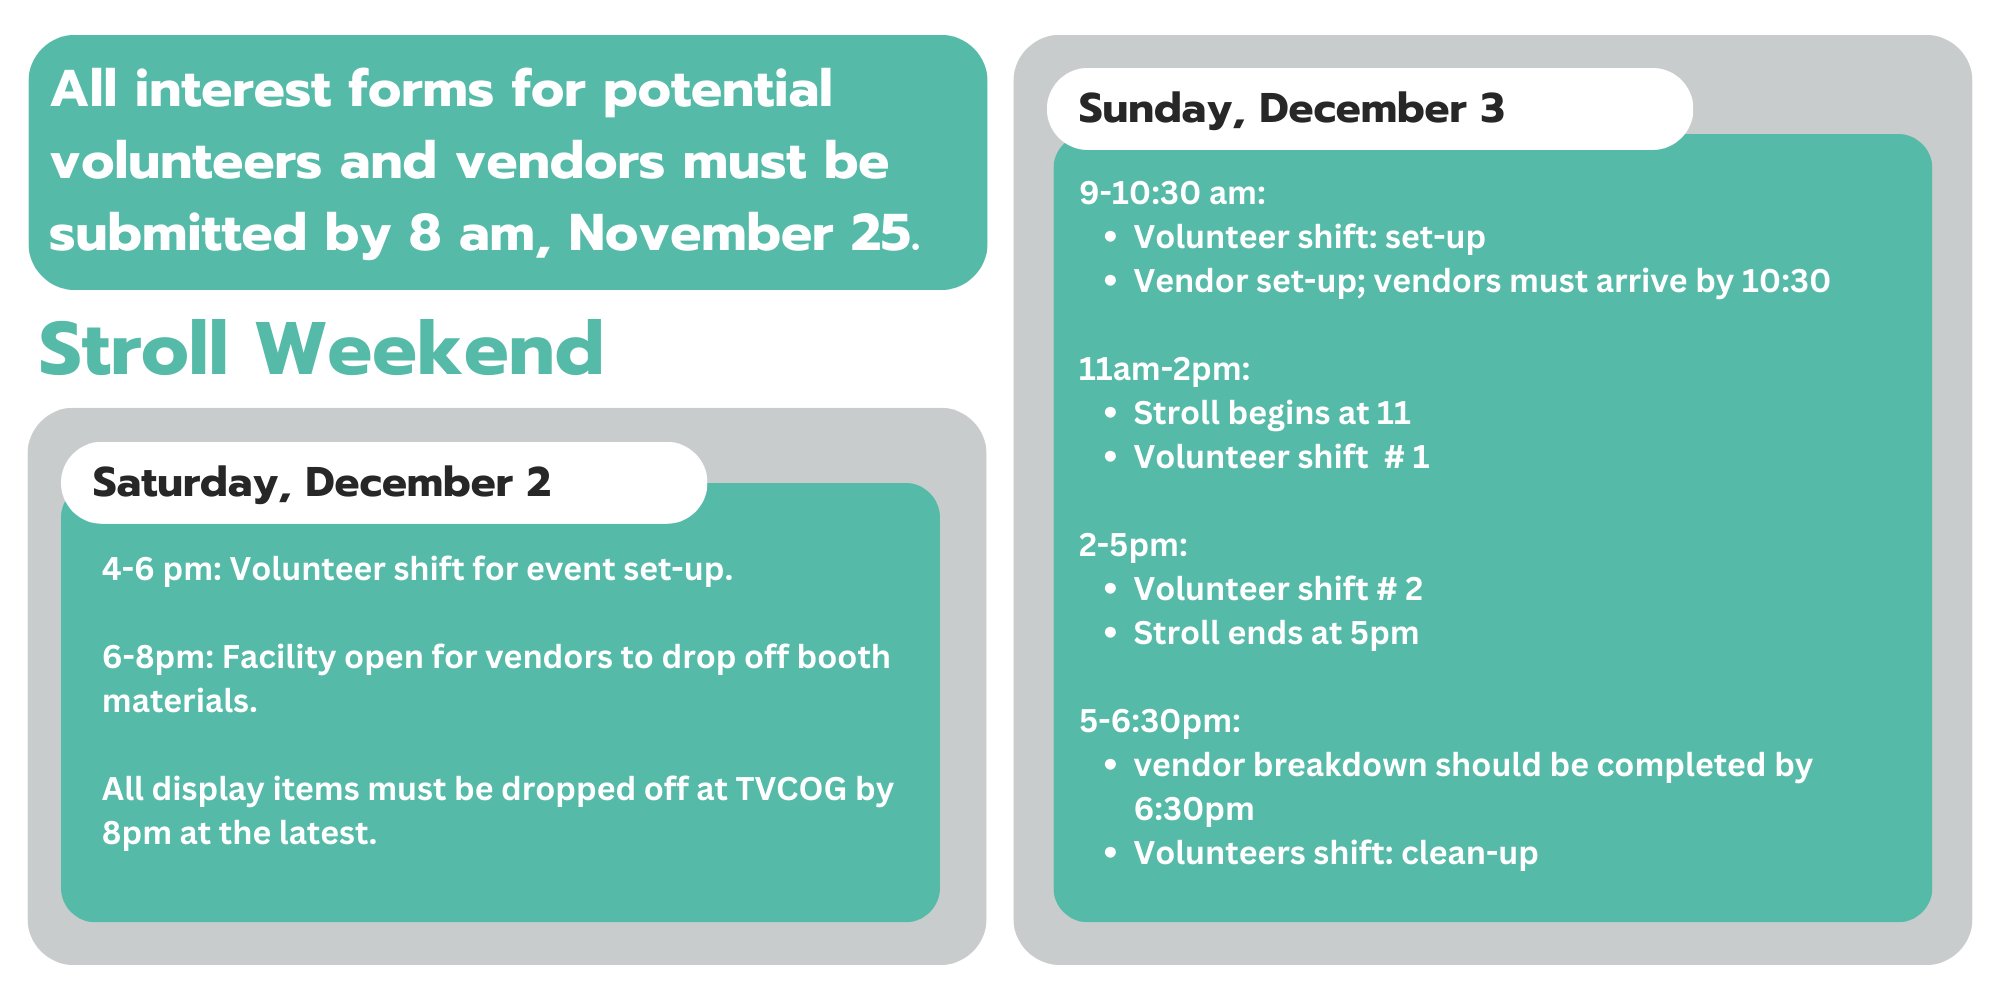 Victorian_Stroll_Schedule_Info_for_Vendors__Volunteers-_Web_Graphic_1.png - 216.52 kB